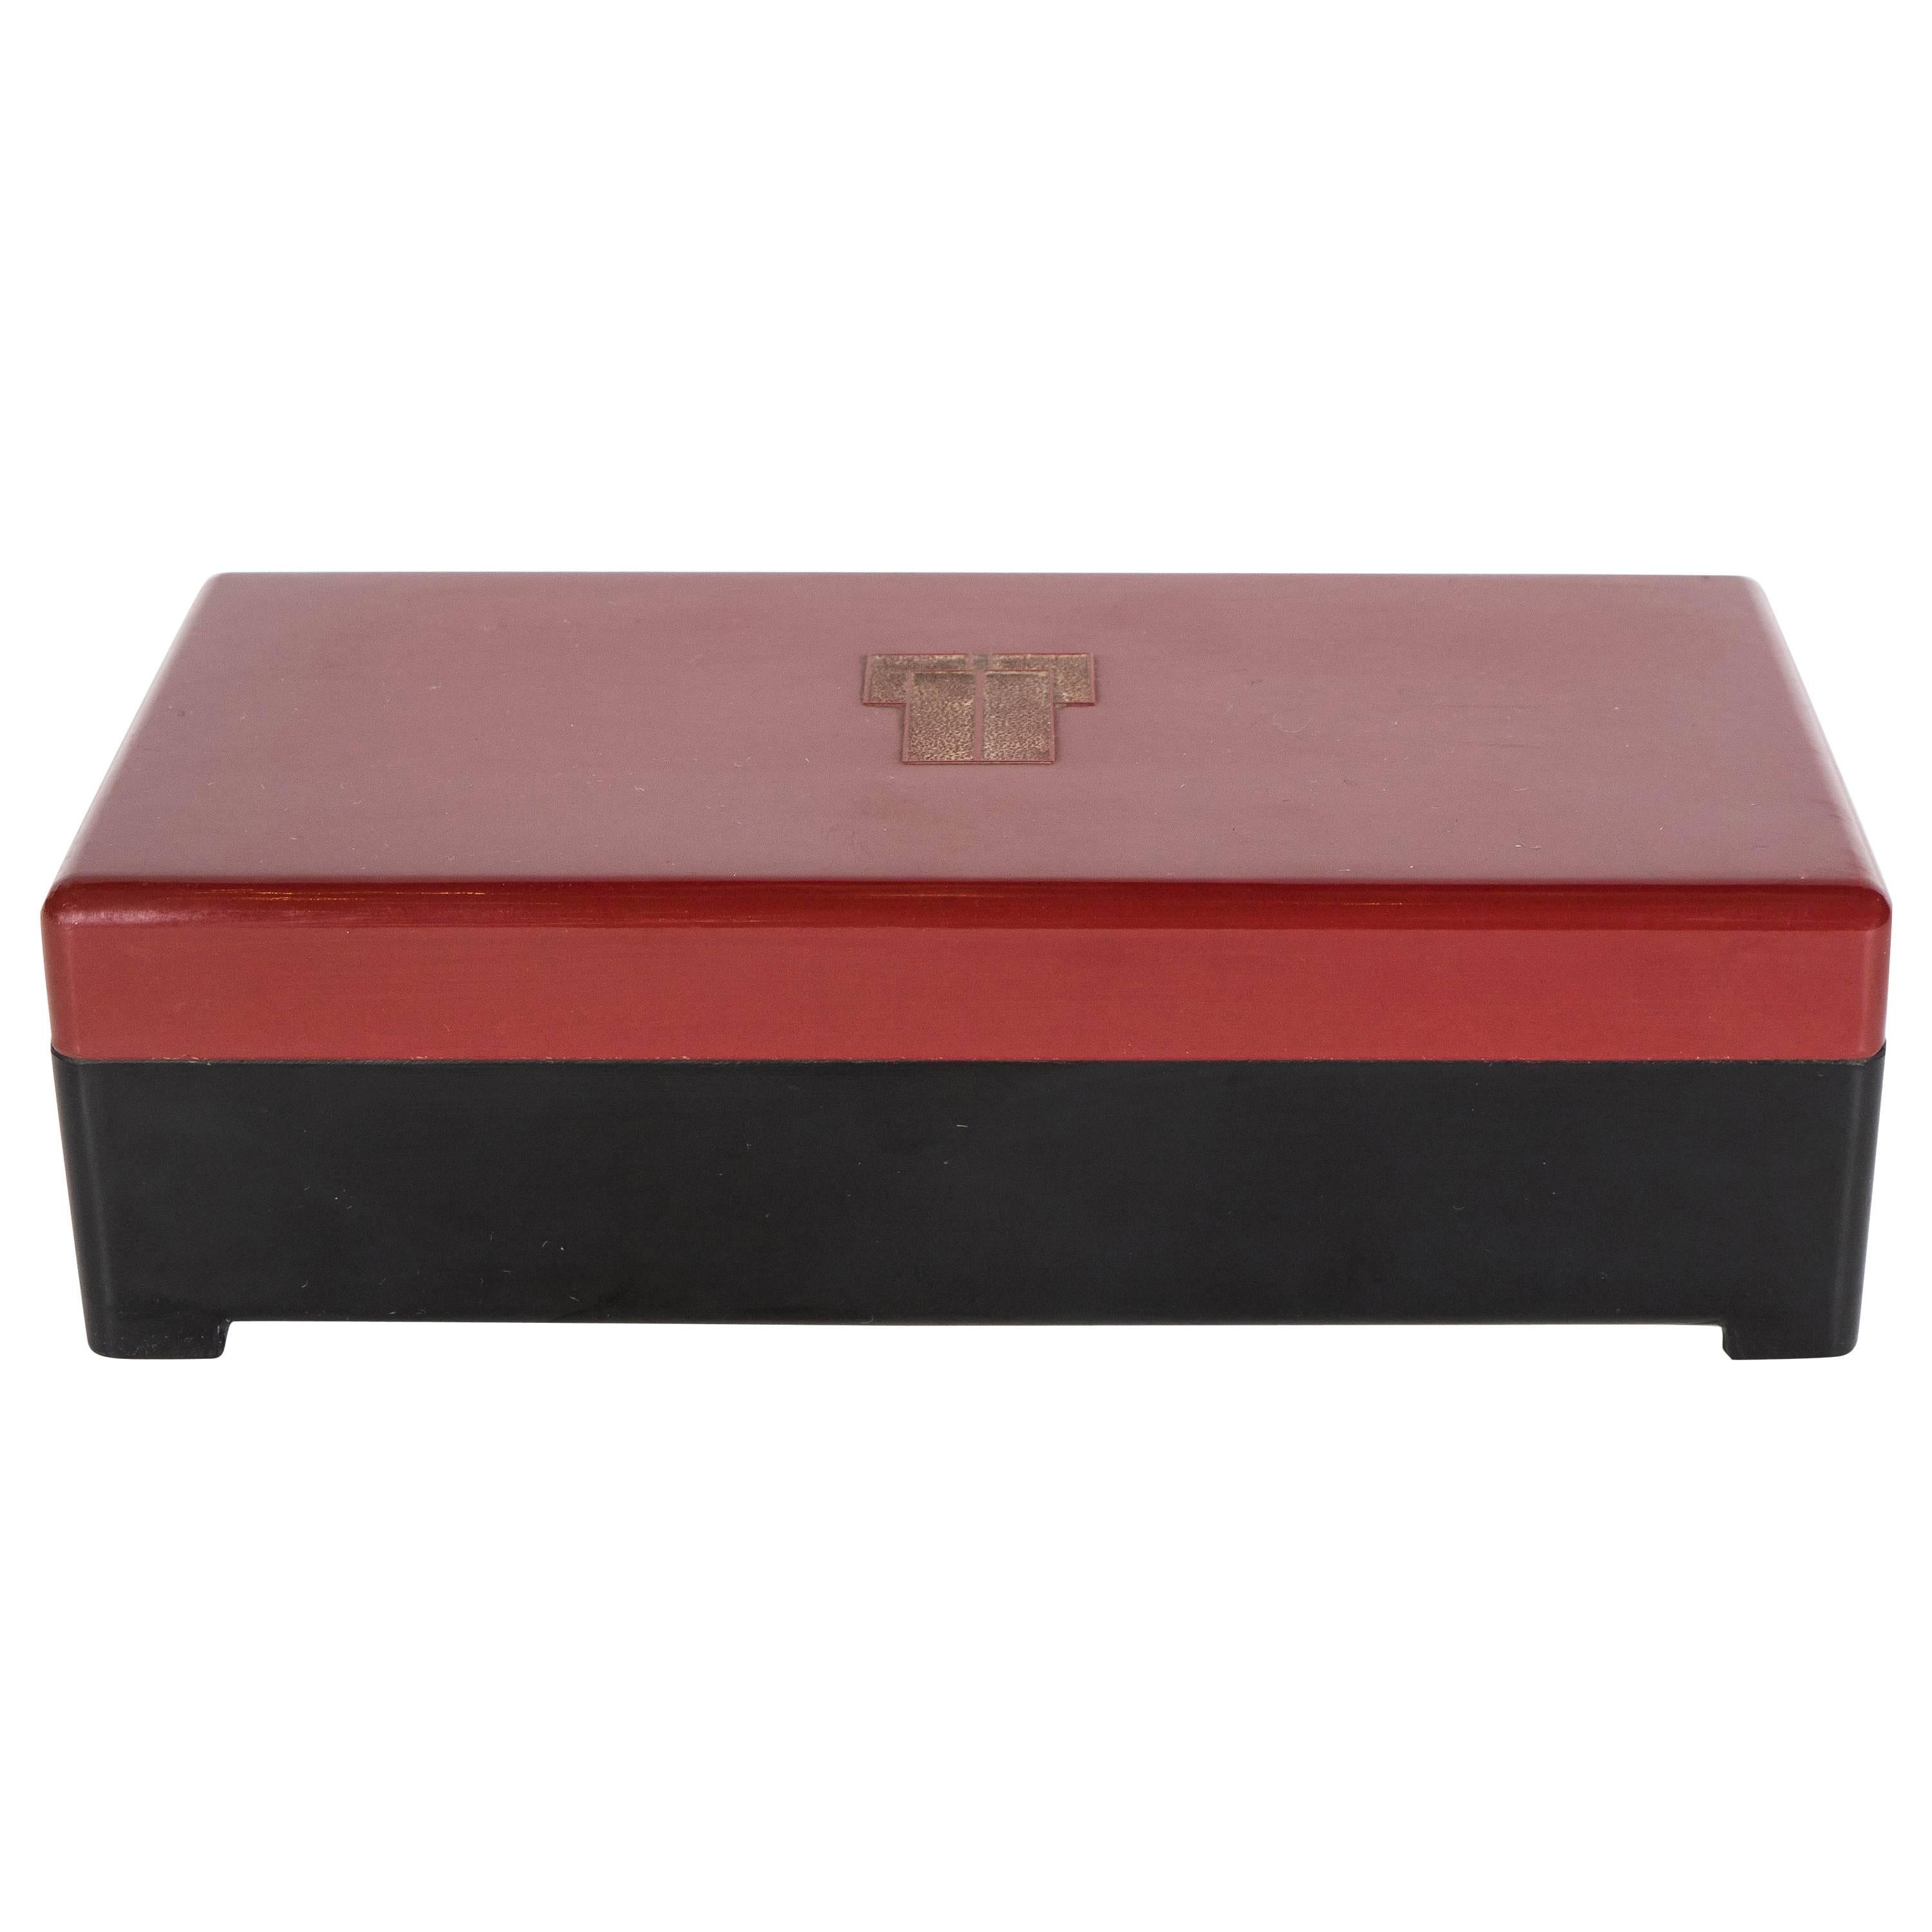 Streamlined Art Deco Bakelite Box with Burgundy Top with Cubist Detail